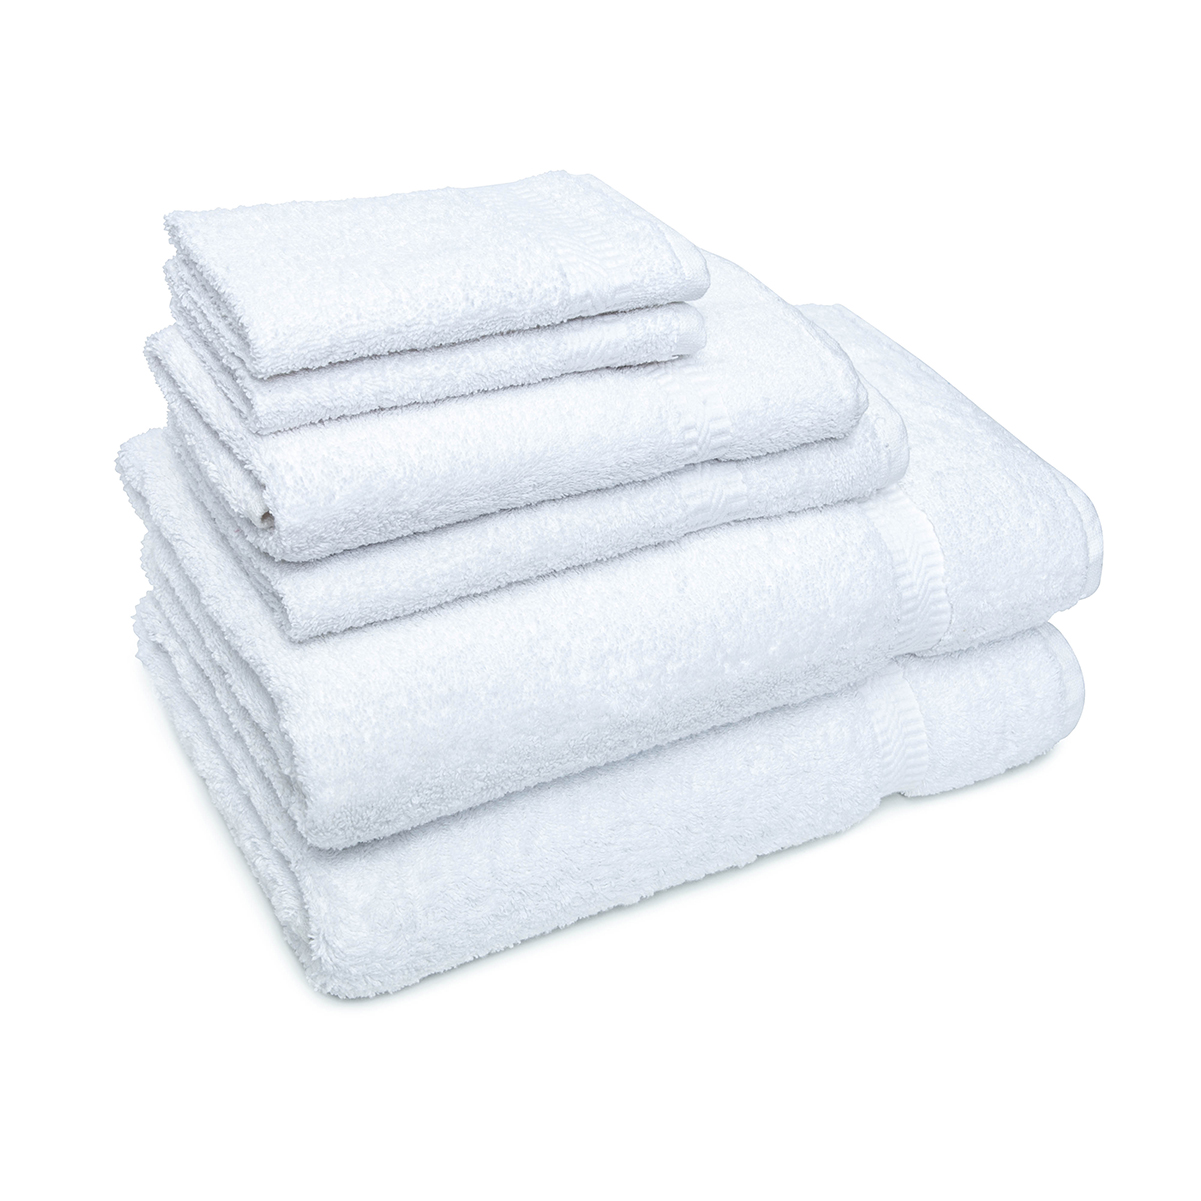 What materials are used in the making of ADI's plush white hotel guestroom towels?